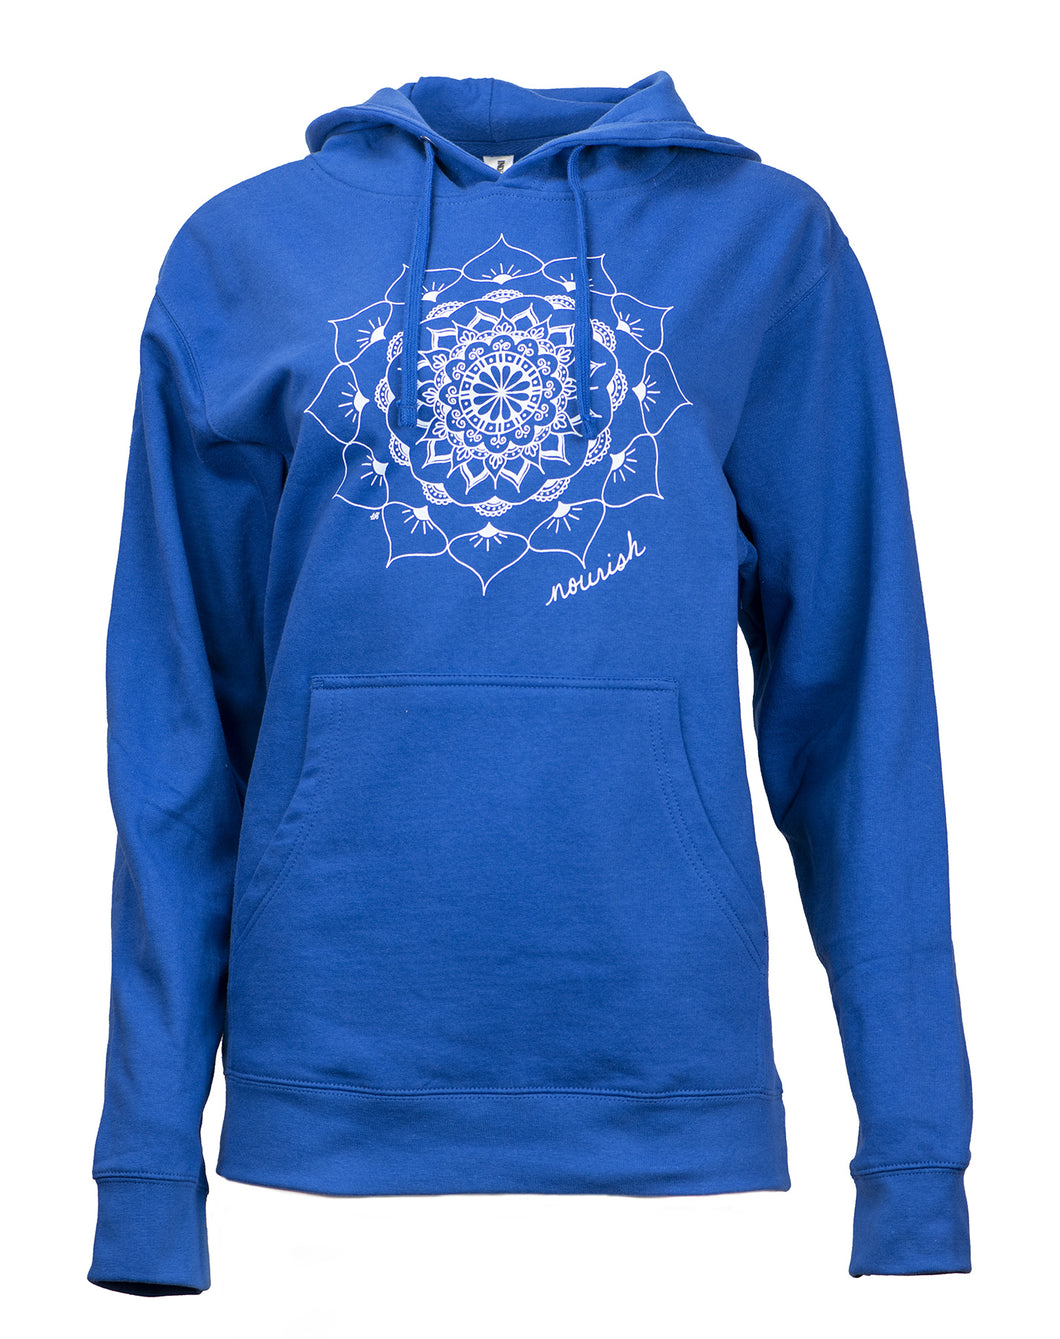 Front view image of the Royal Blue hooded sweatshirt with white mandala design. 